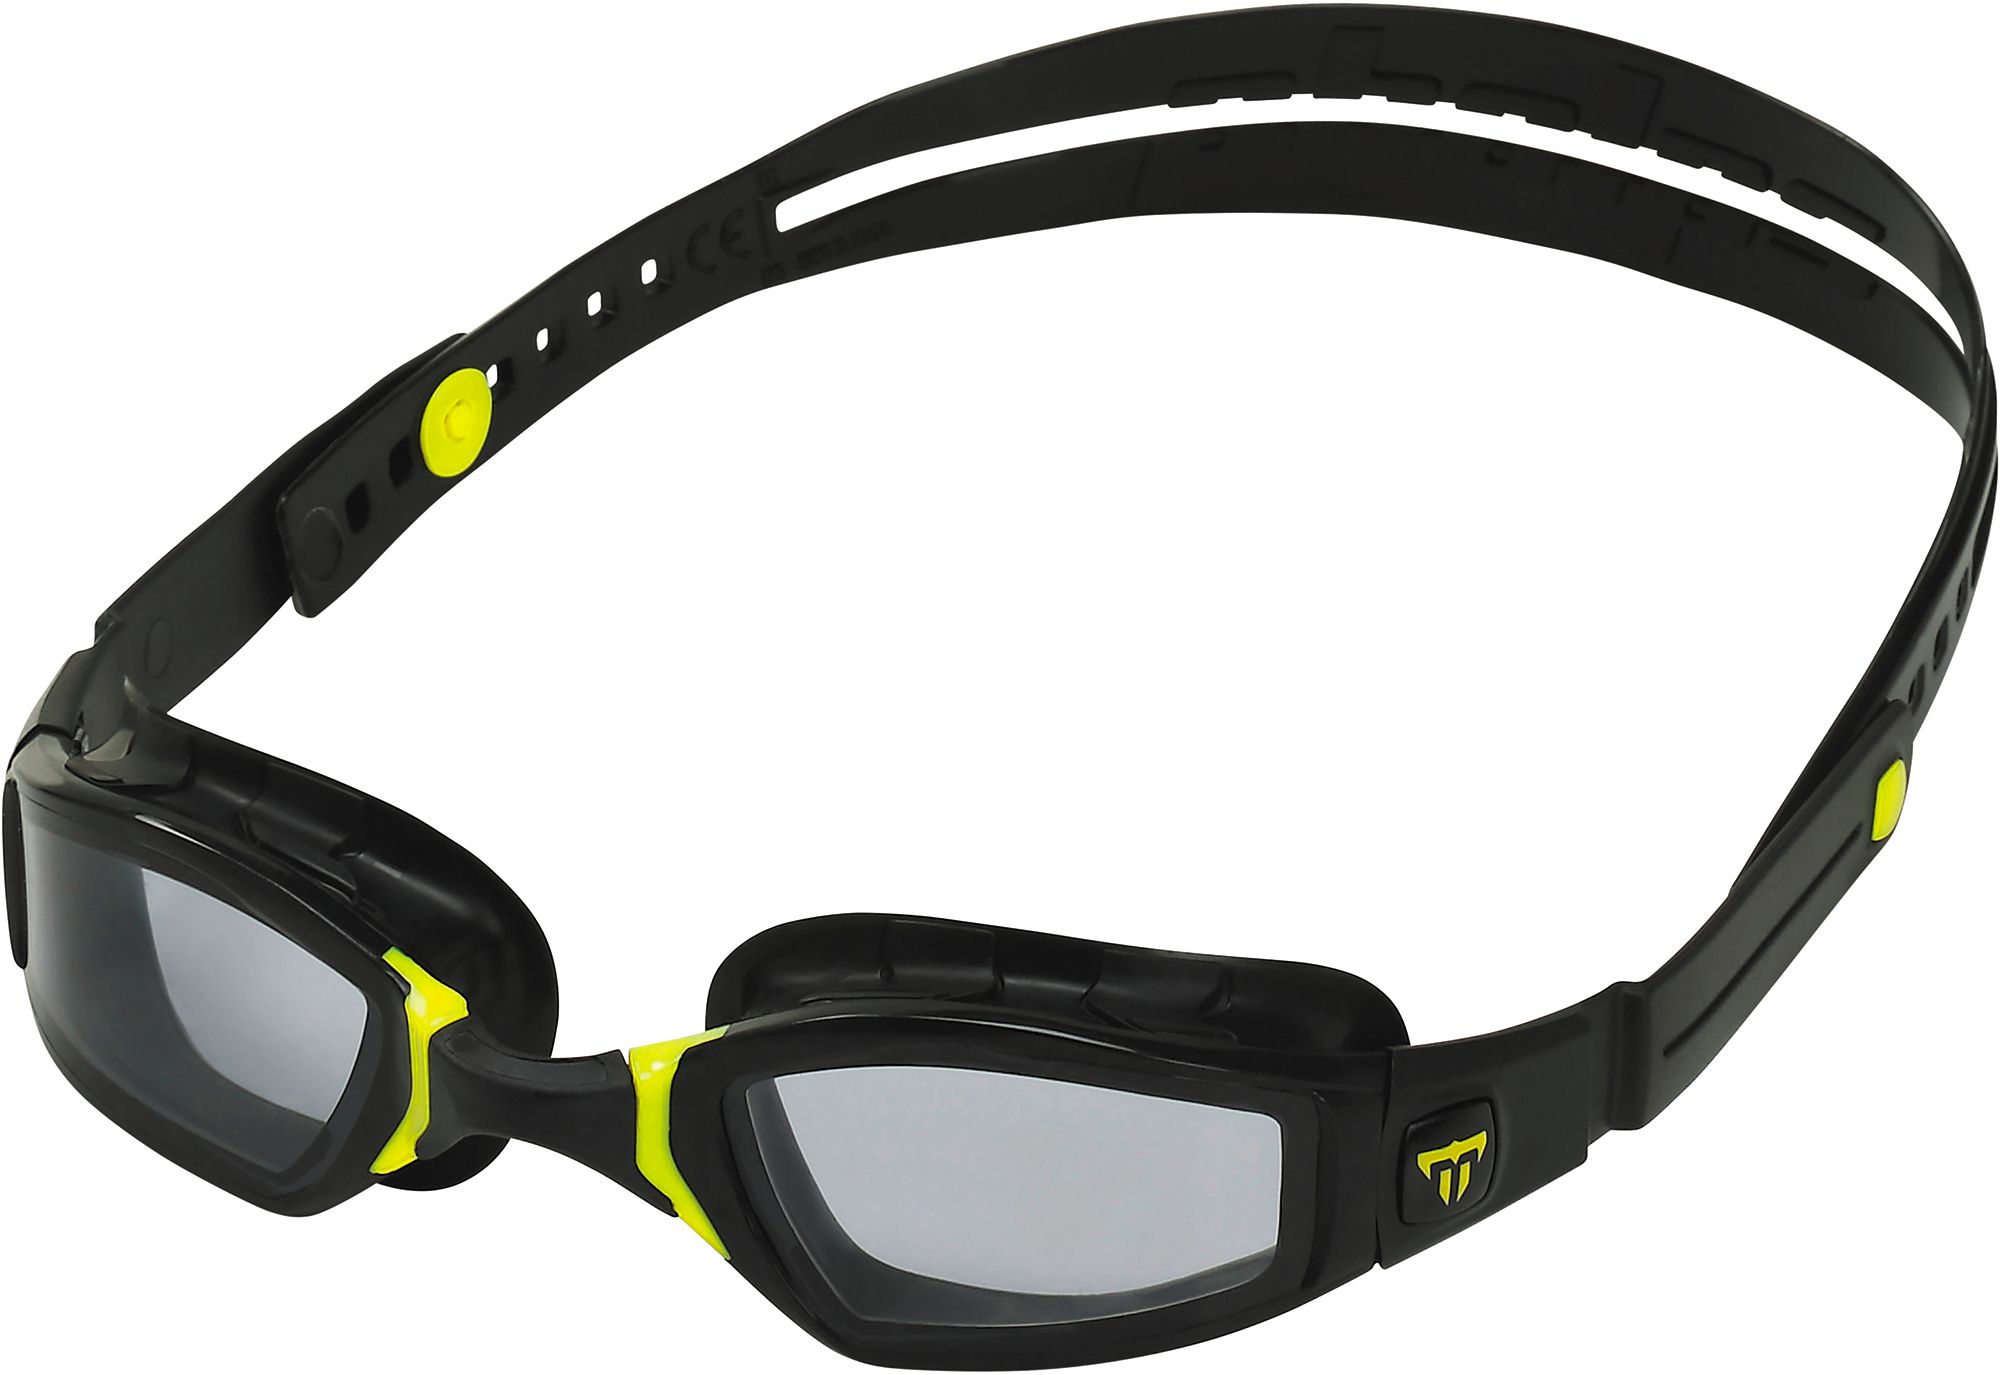 blacked out swimming goggles